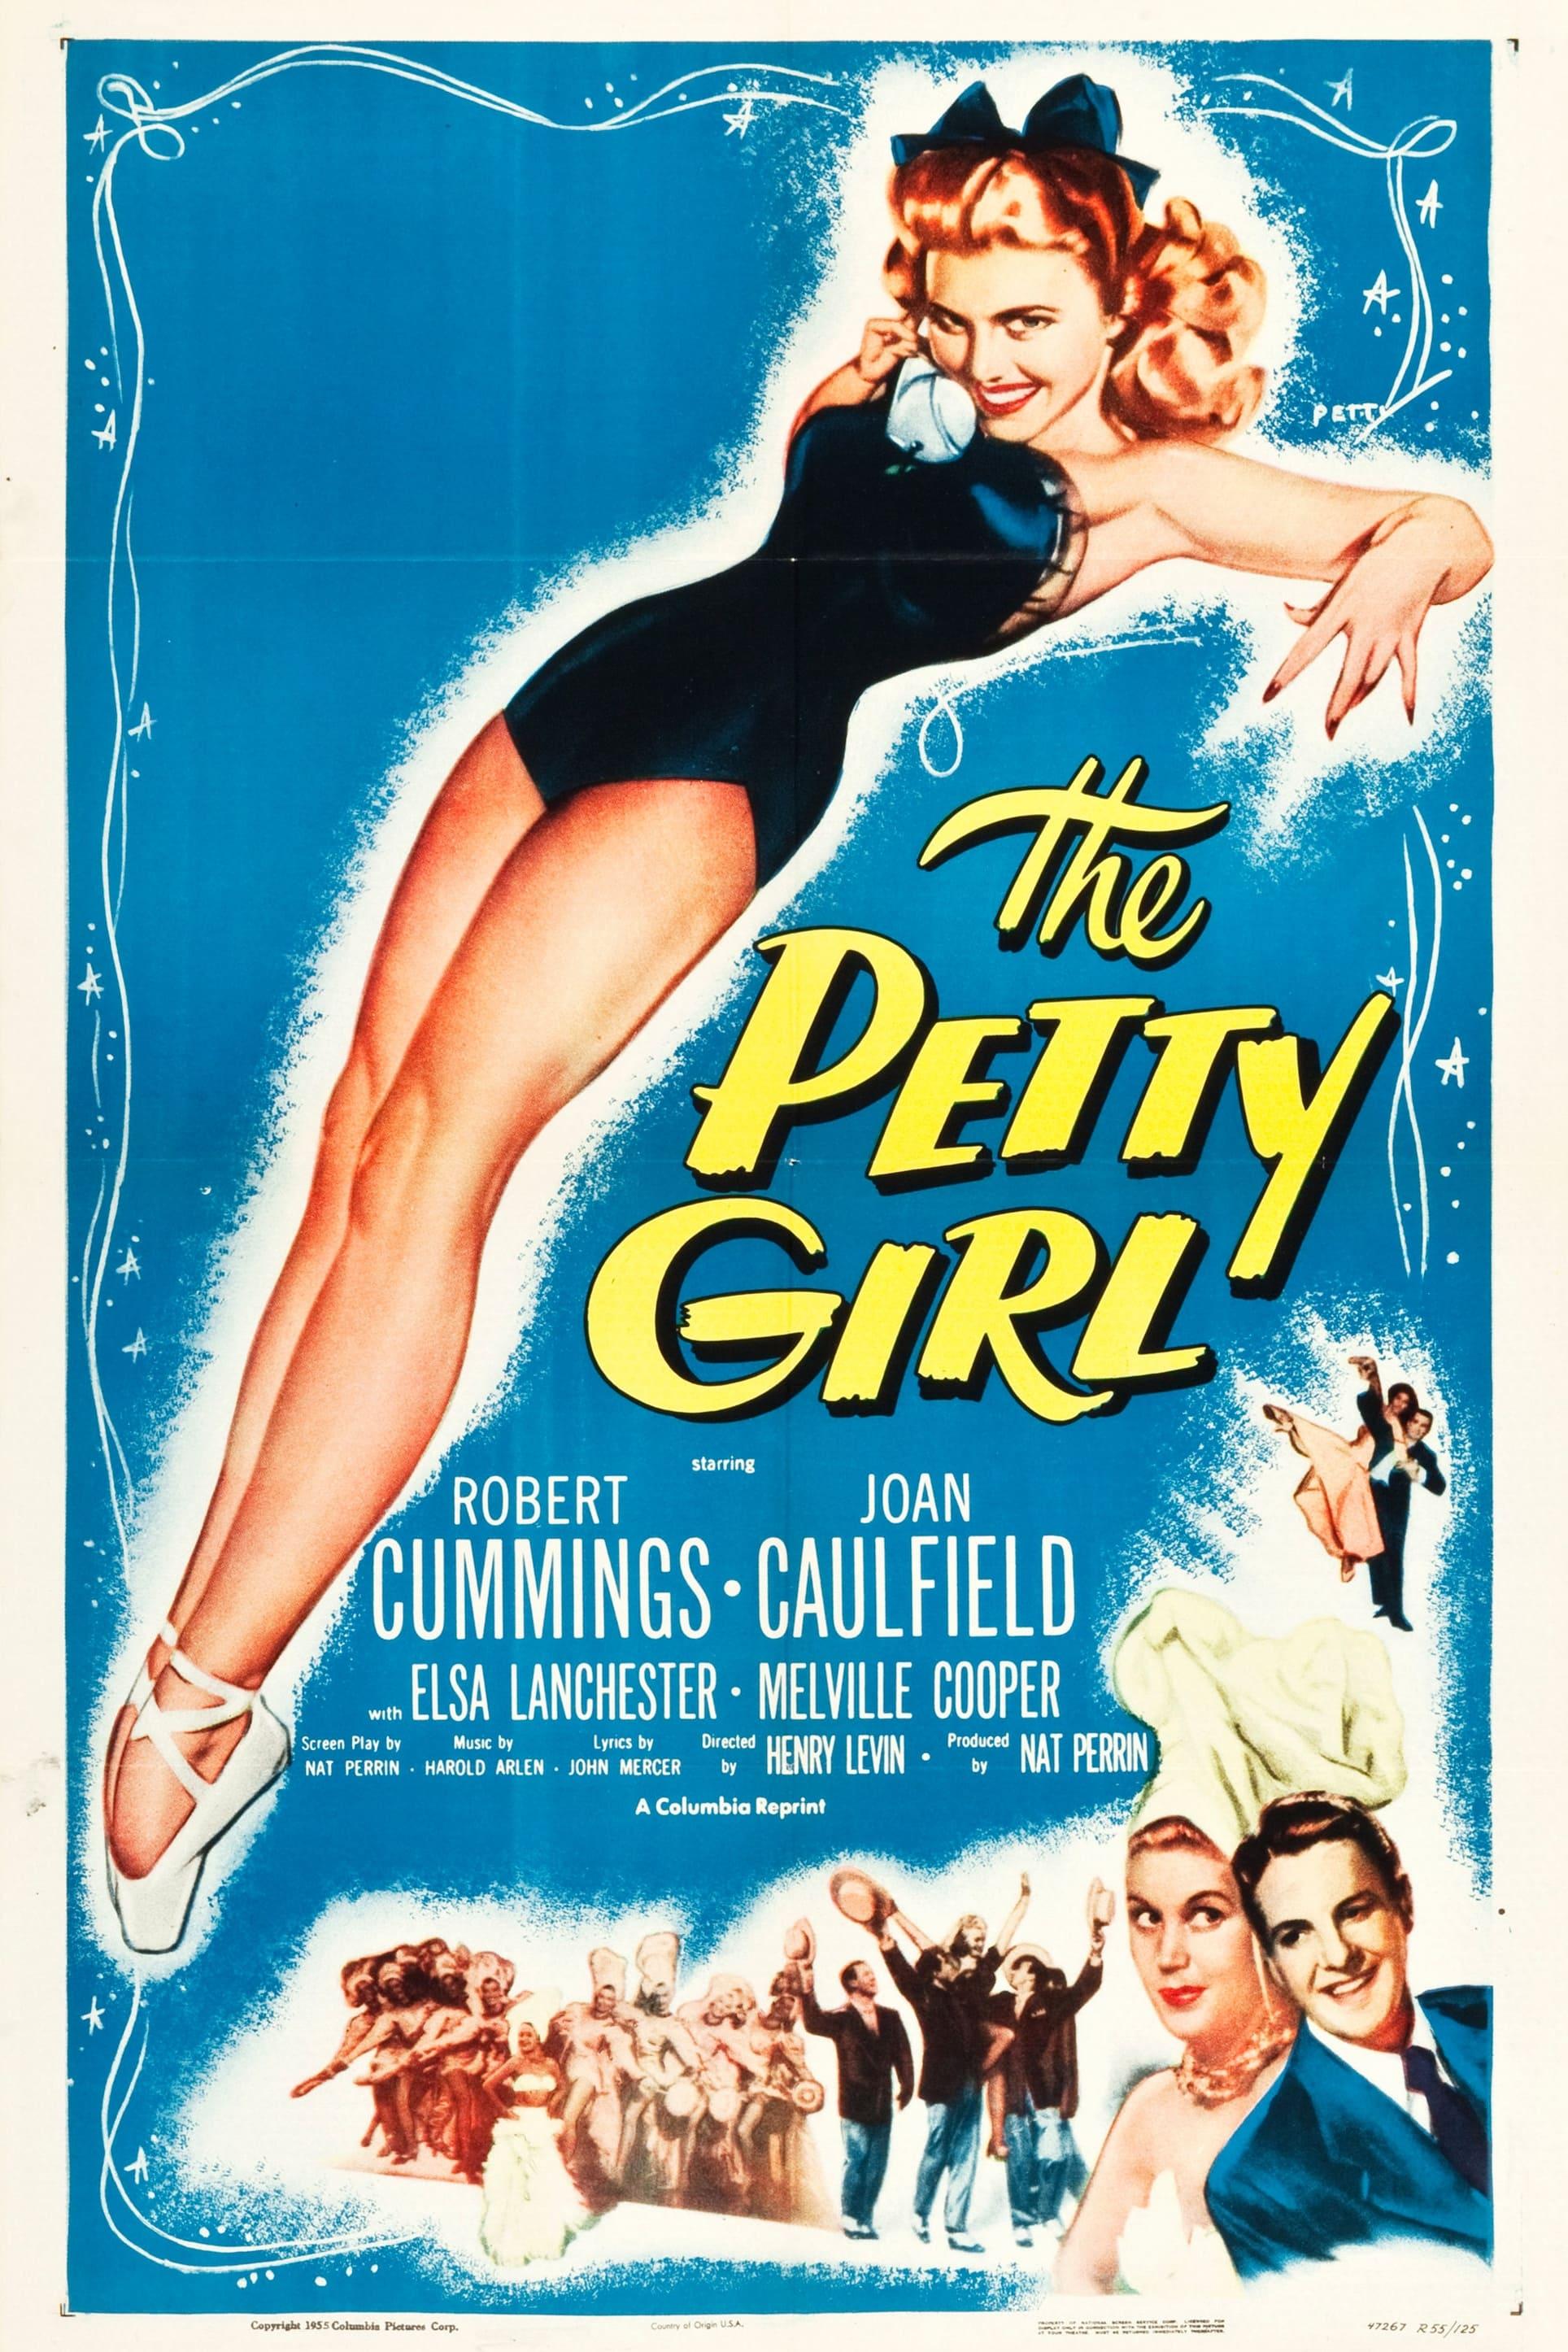 The Petty Girl poster